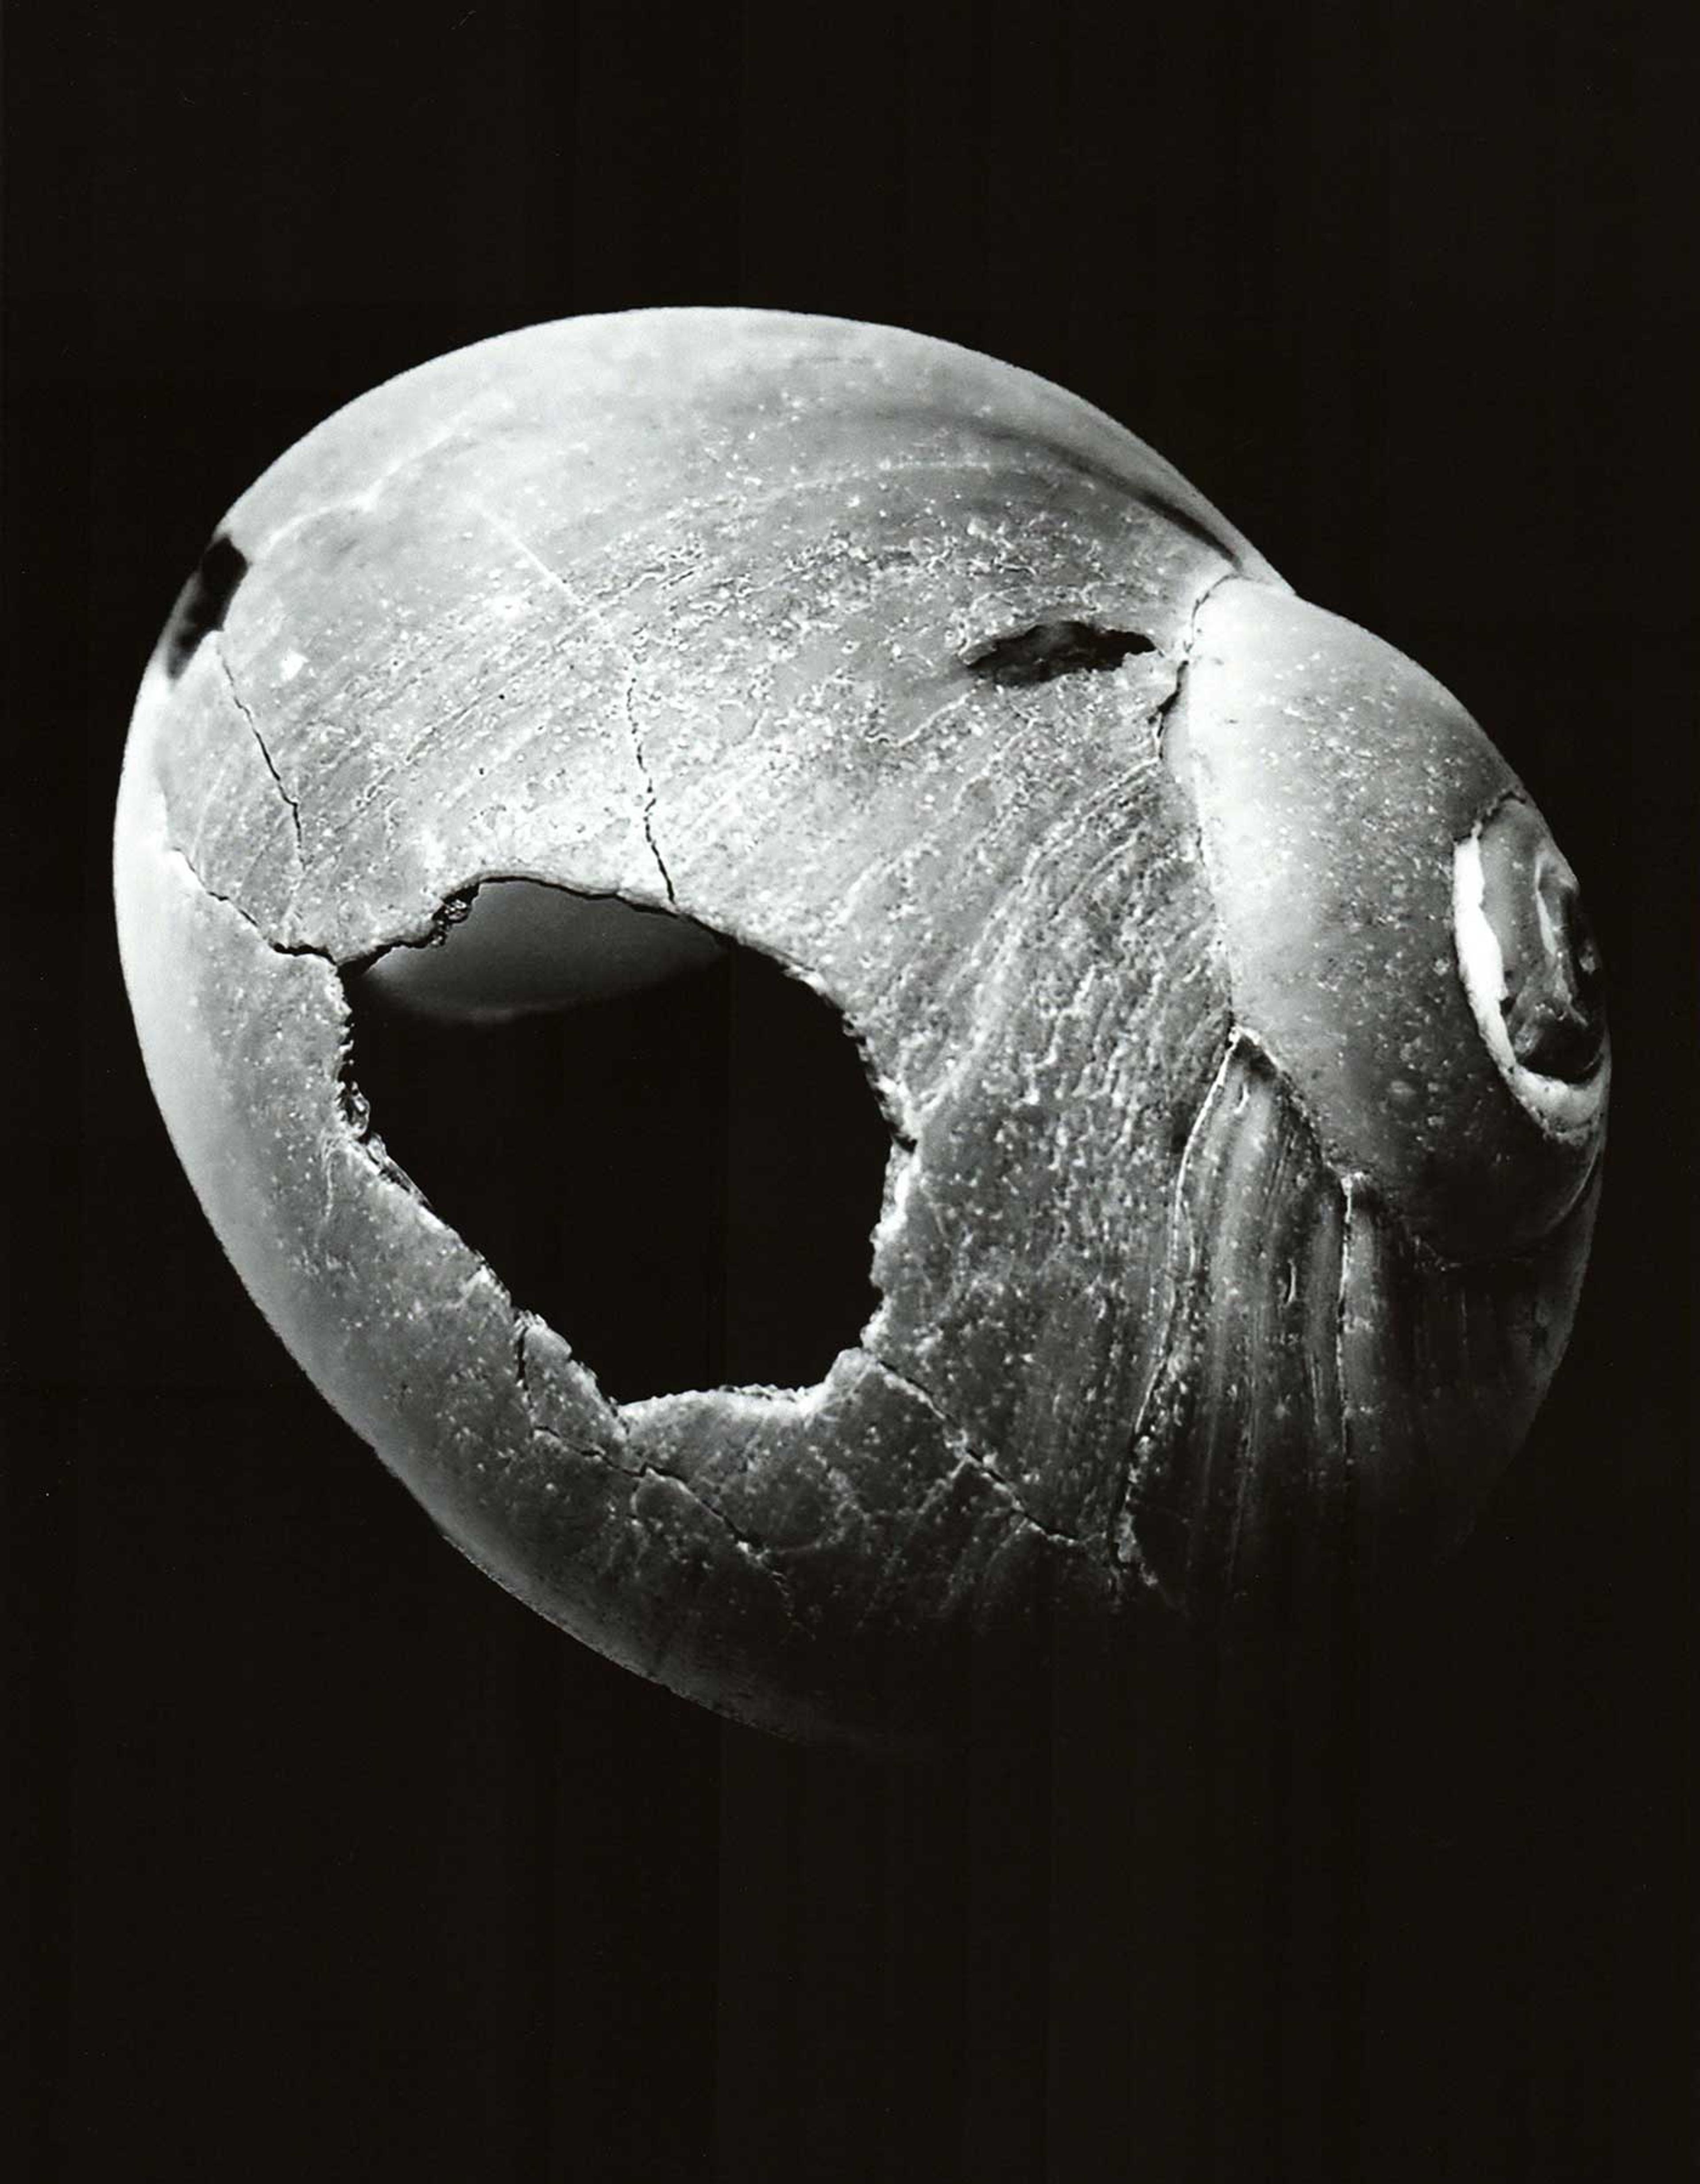 Black and white photograph of a cracked shell.